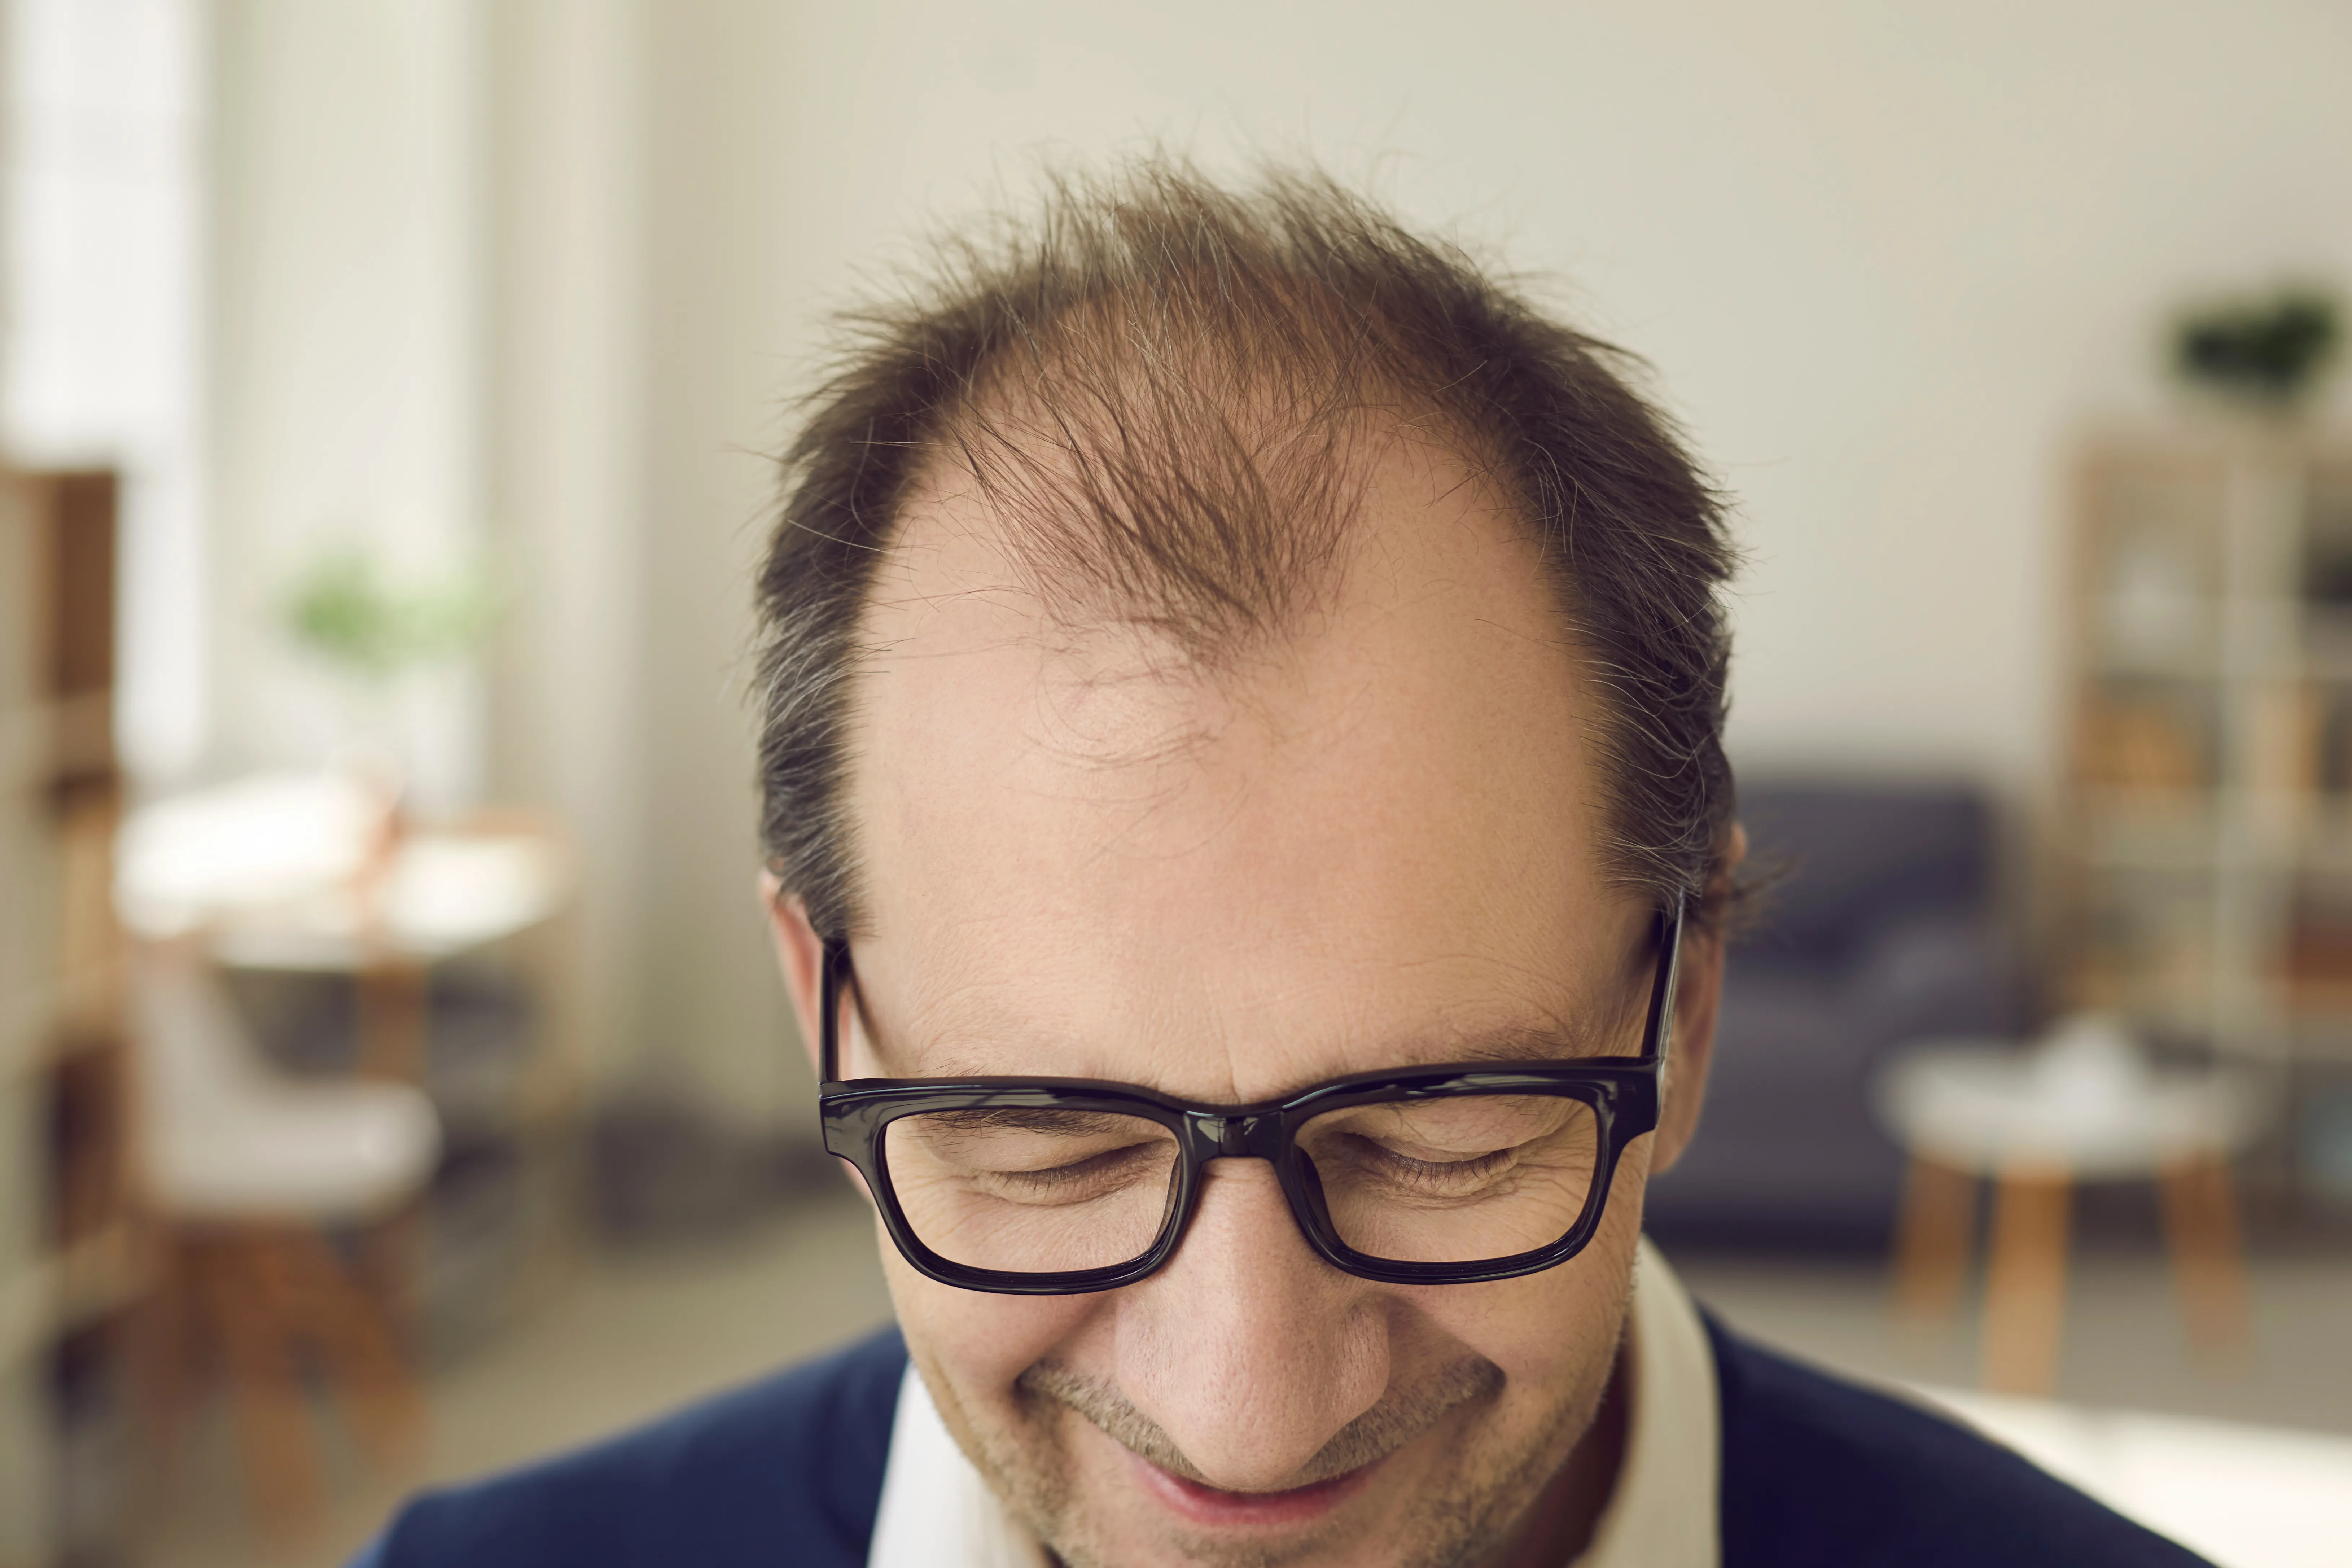 What You Can Expect From Hair Transplants In 2023 (Plus Costs of Popular Locations)